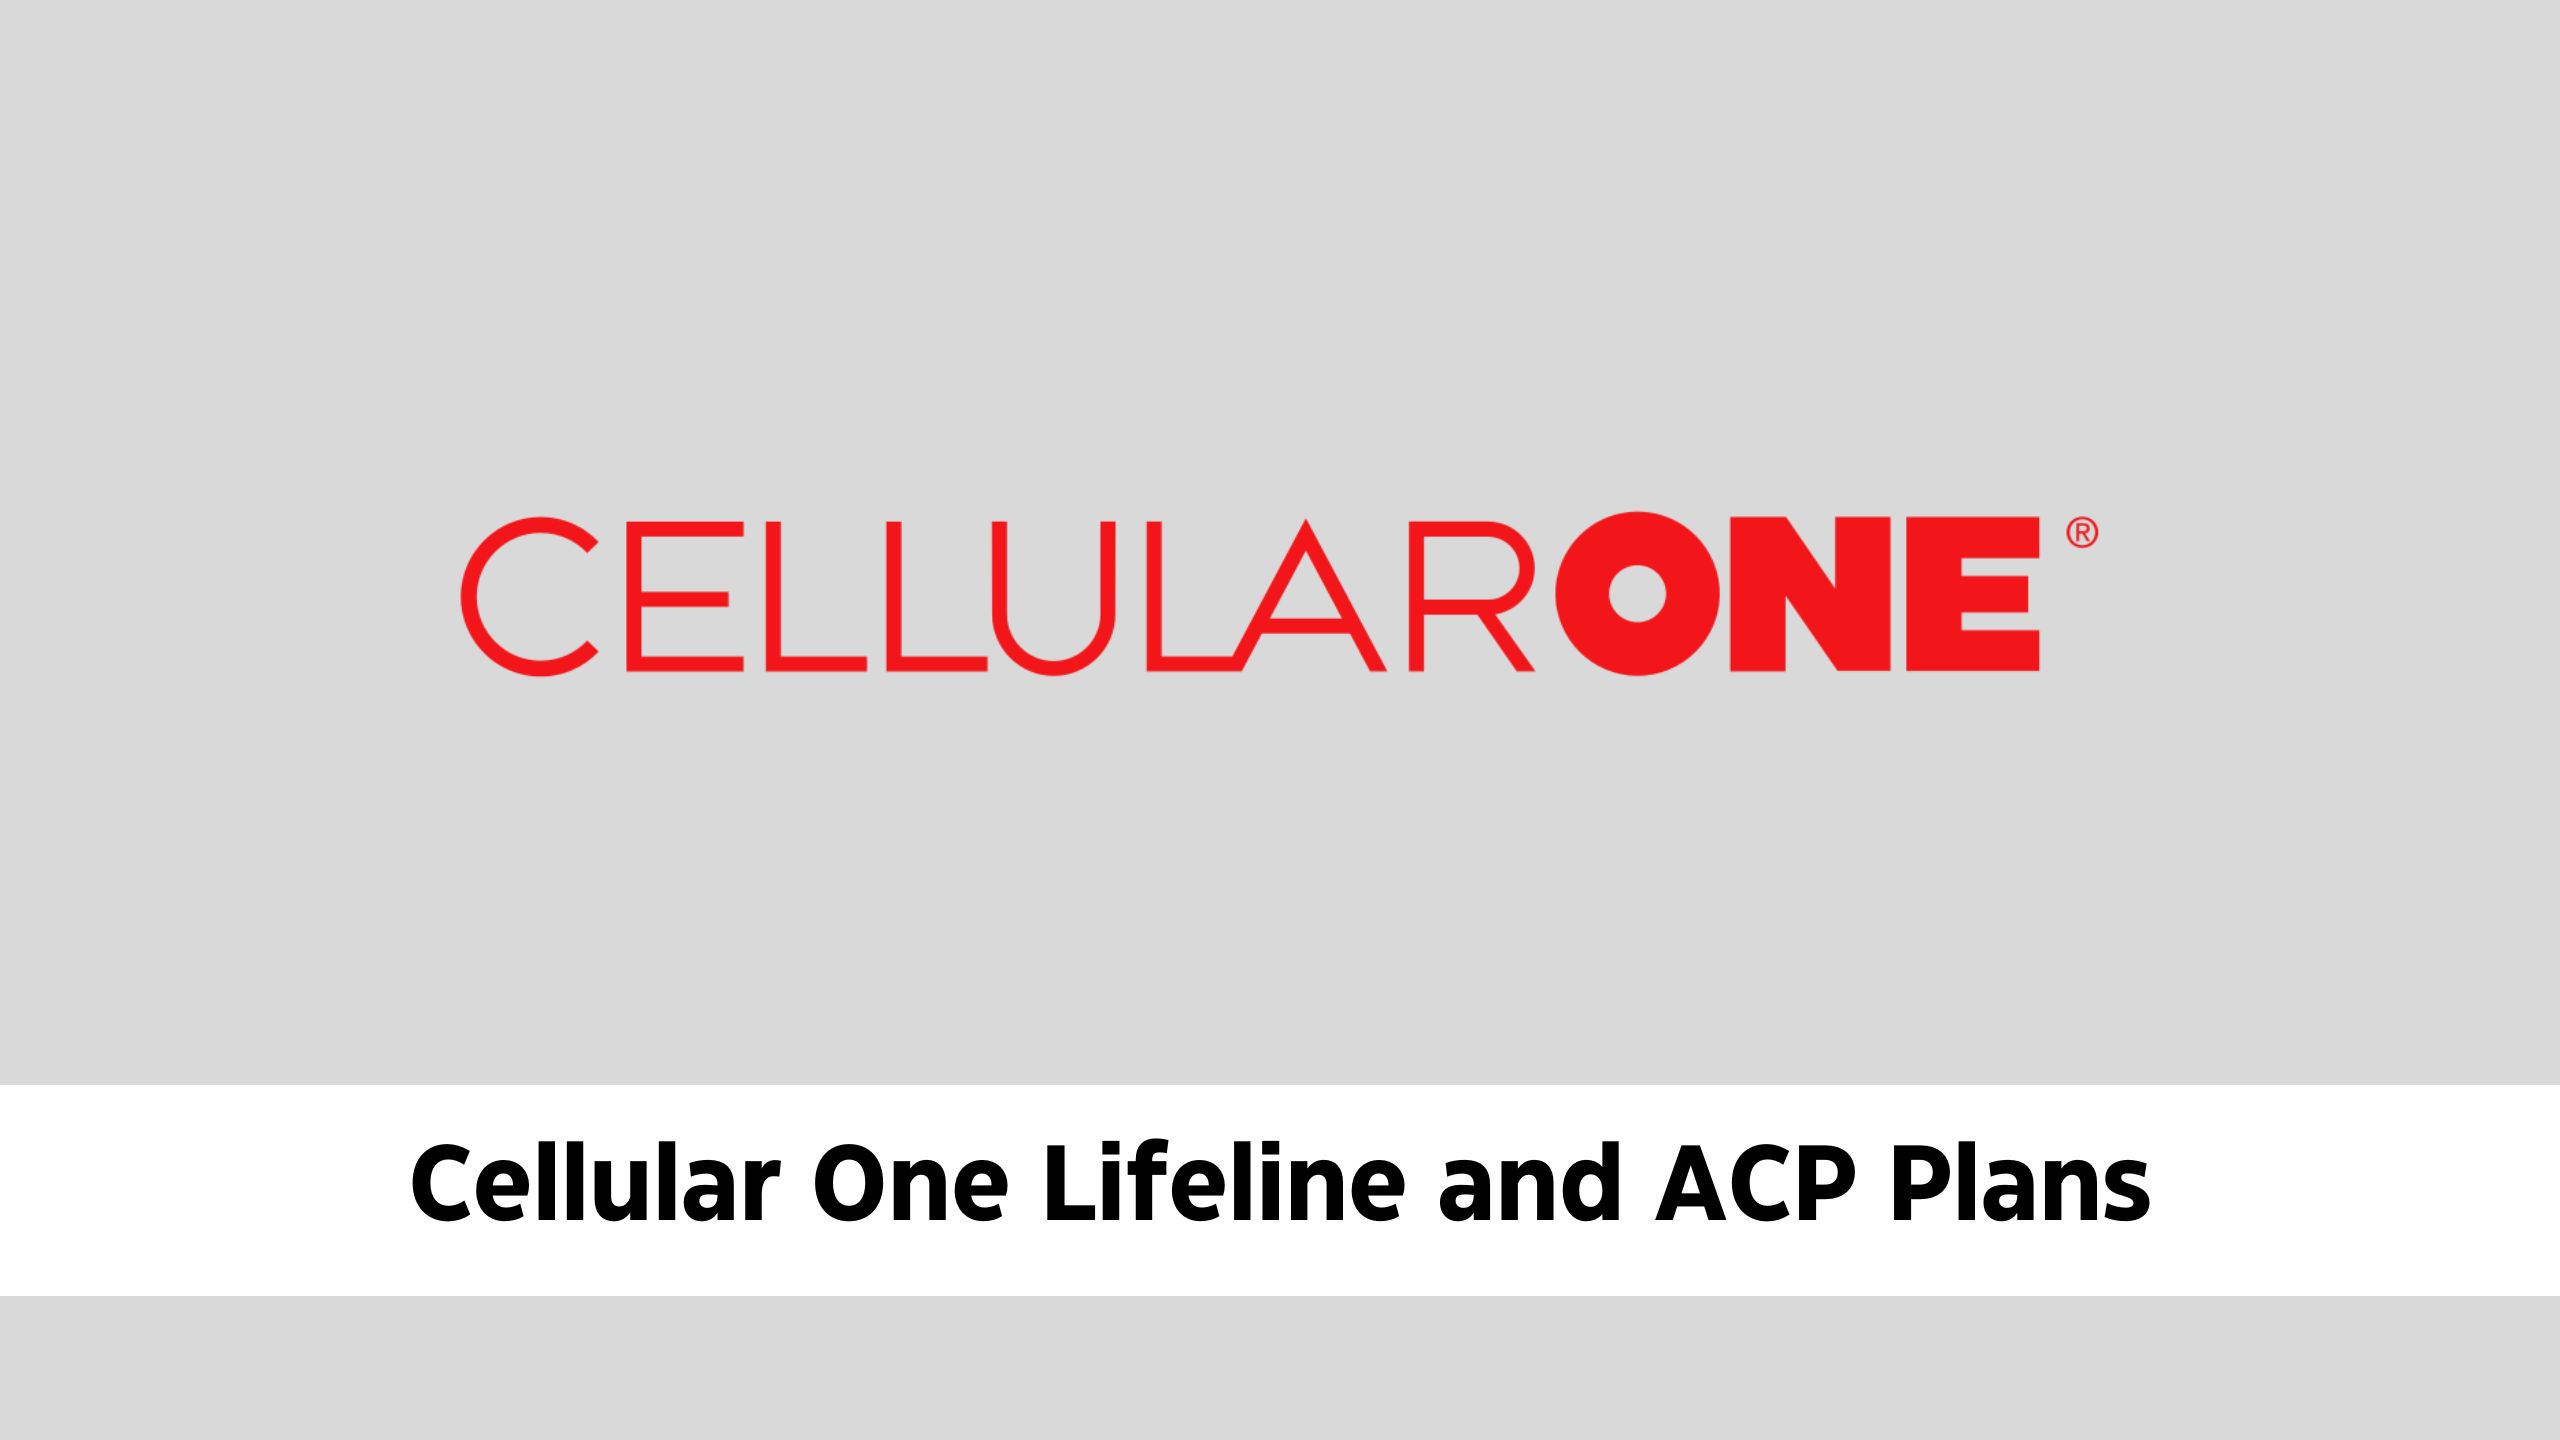 Cellular One Lifeline and ACP Plans : Qualification and Application Guide